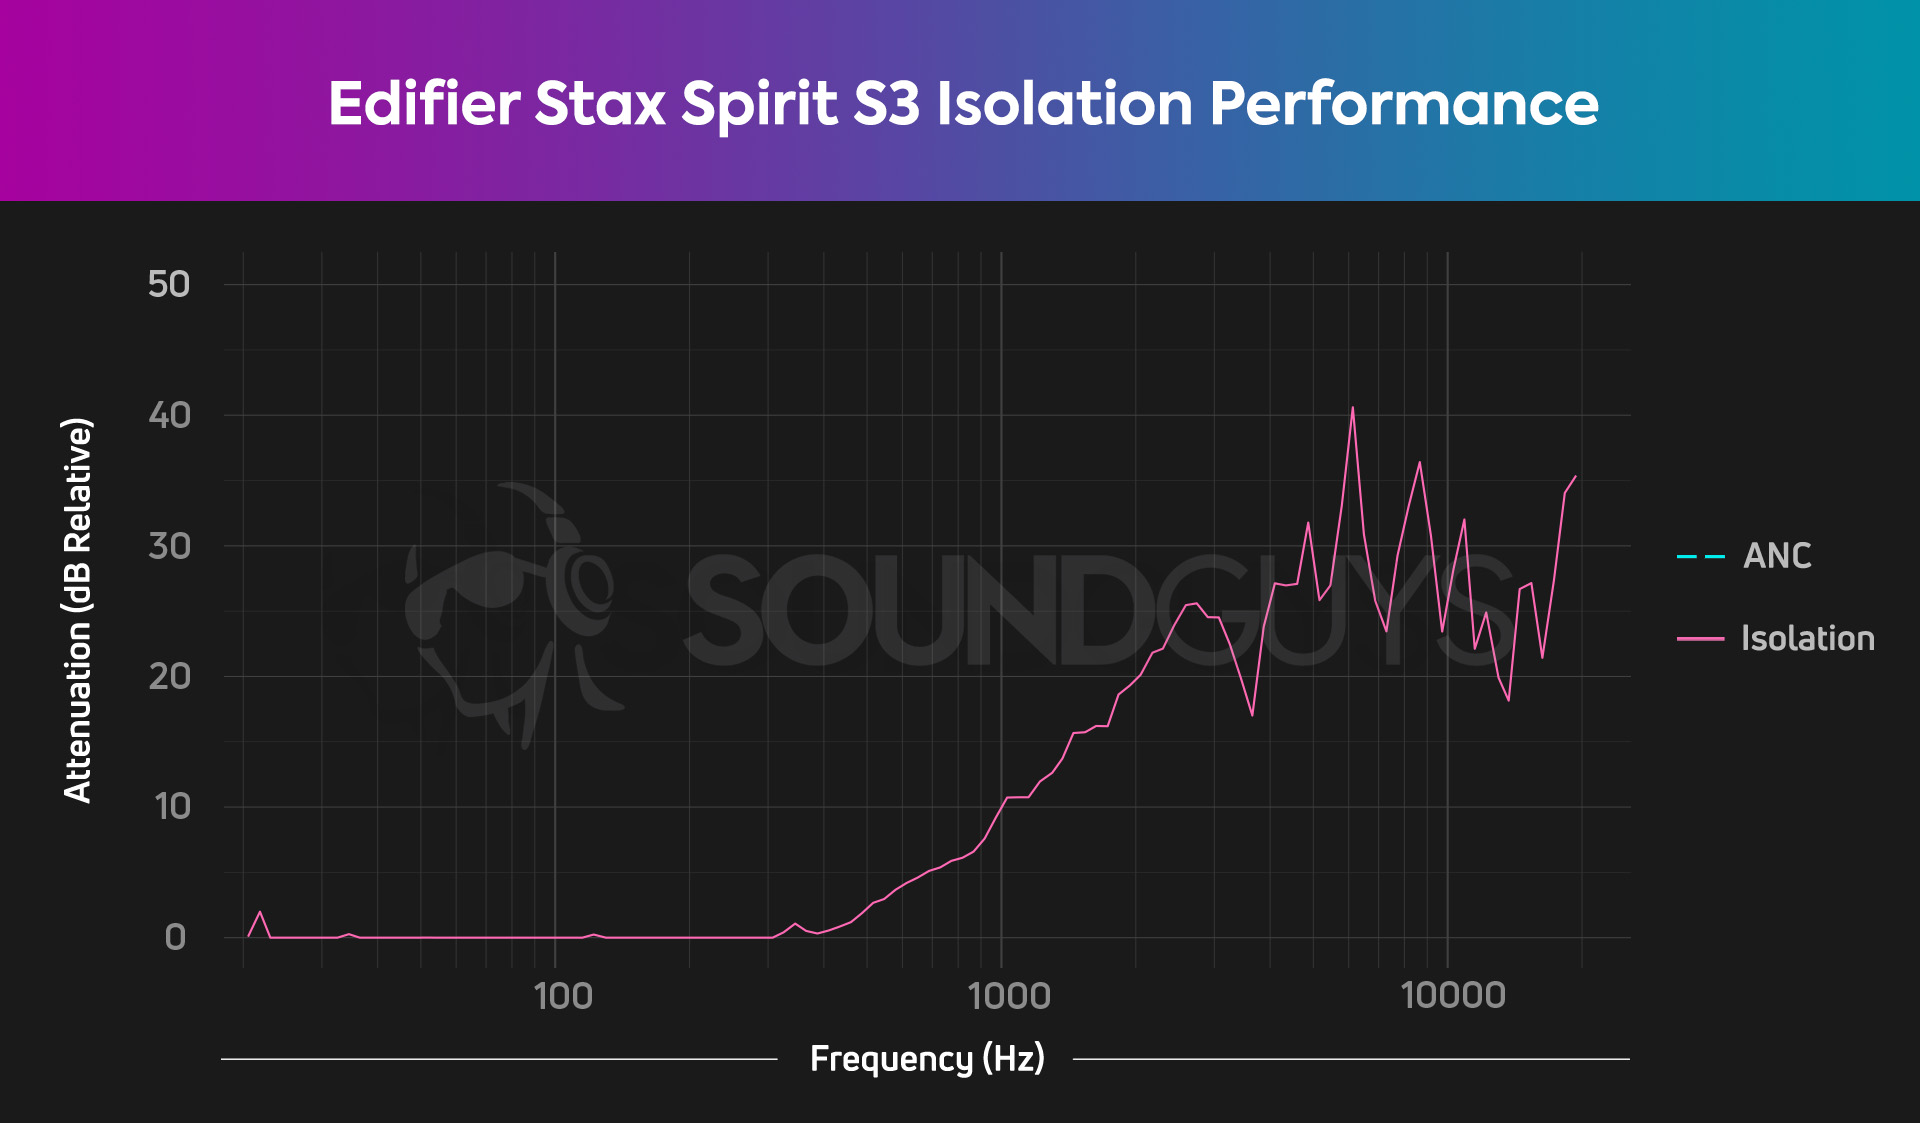 A chart showing the isolation performance of the Edifier Stax Spirit S3 